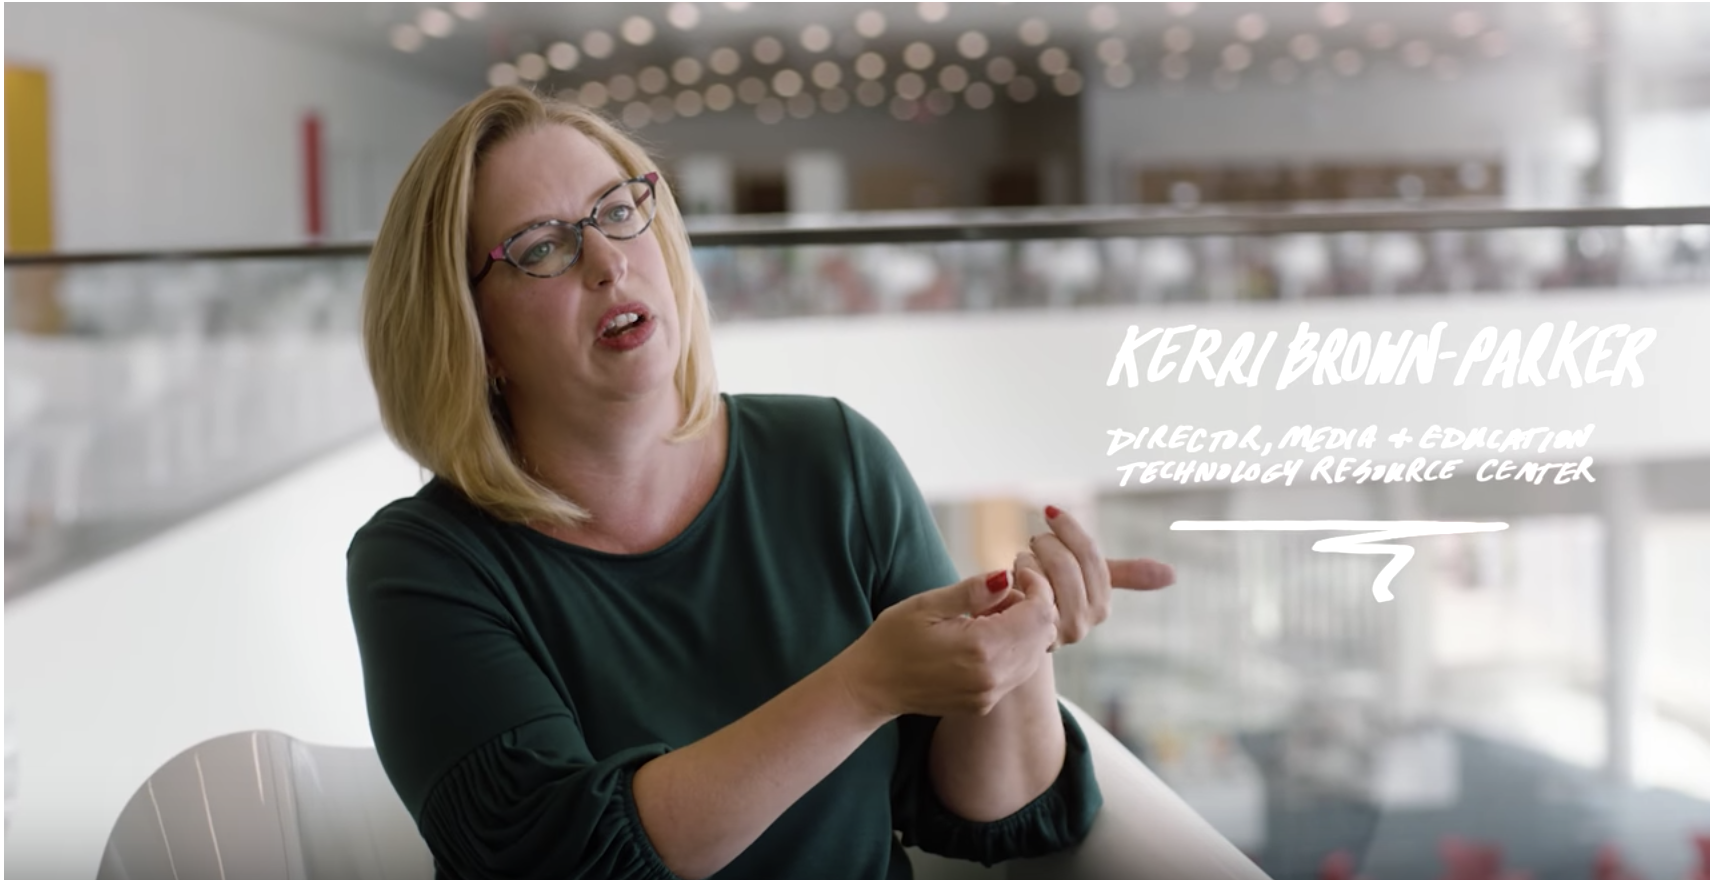 A still from a new video out by Google where NC State Education's Kerri Brown-Parker discusses Jamboard